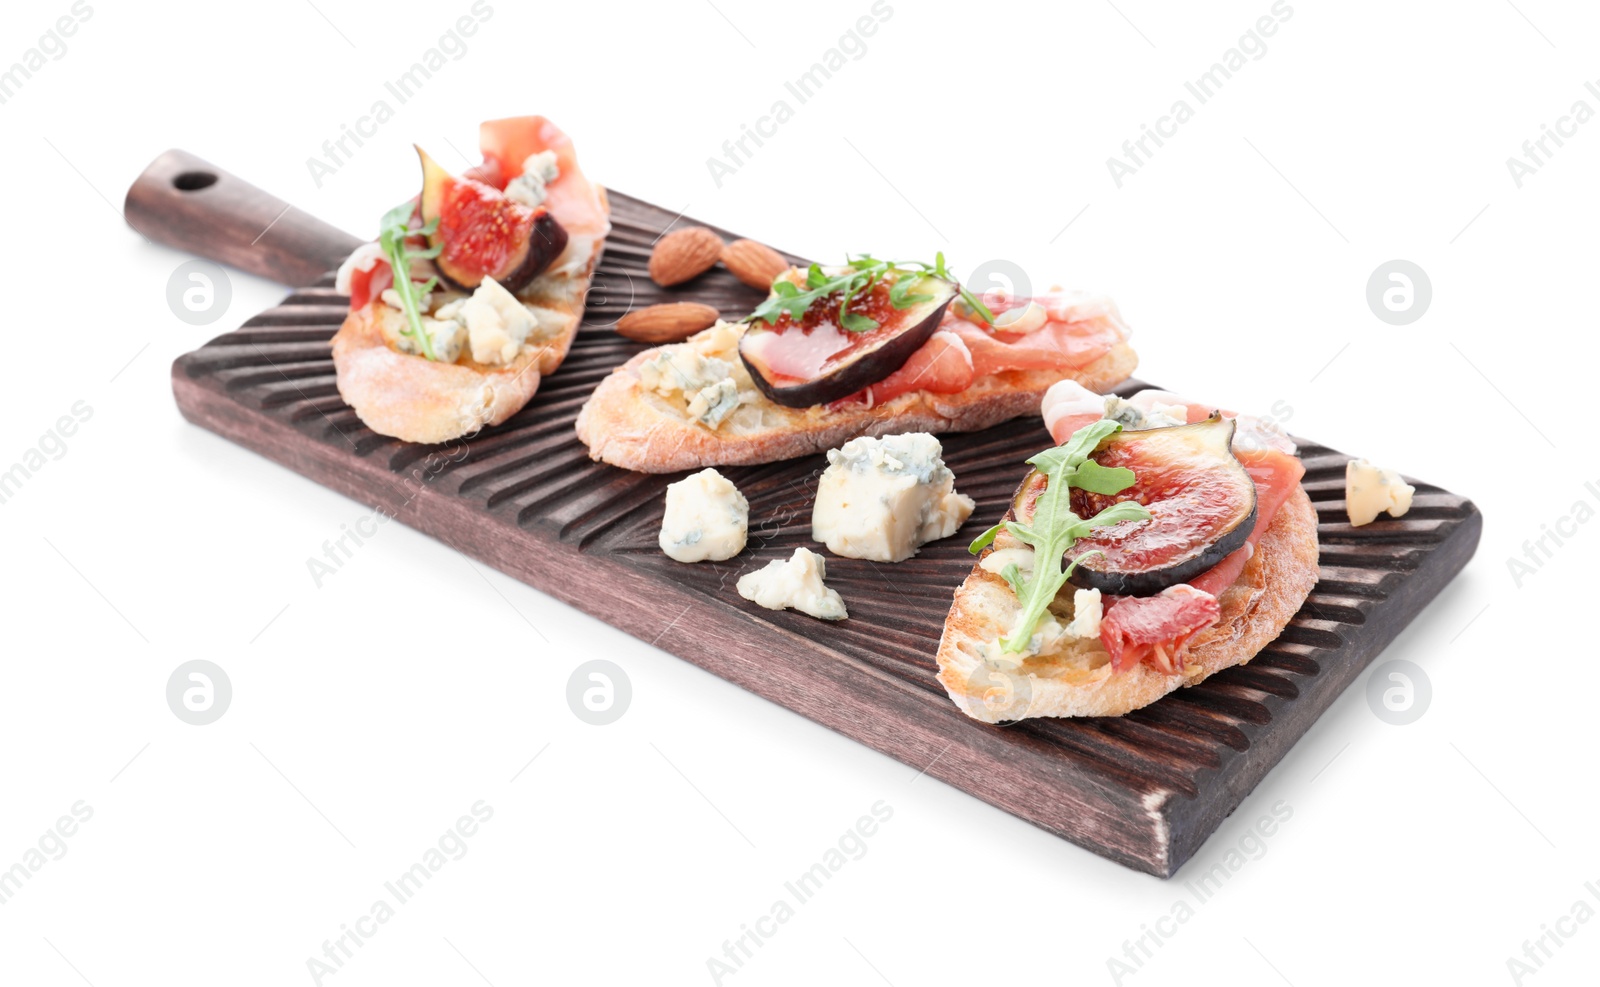 Photo of Sandwiches with ripe figs and prosciutto on white background